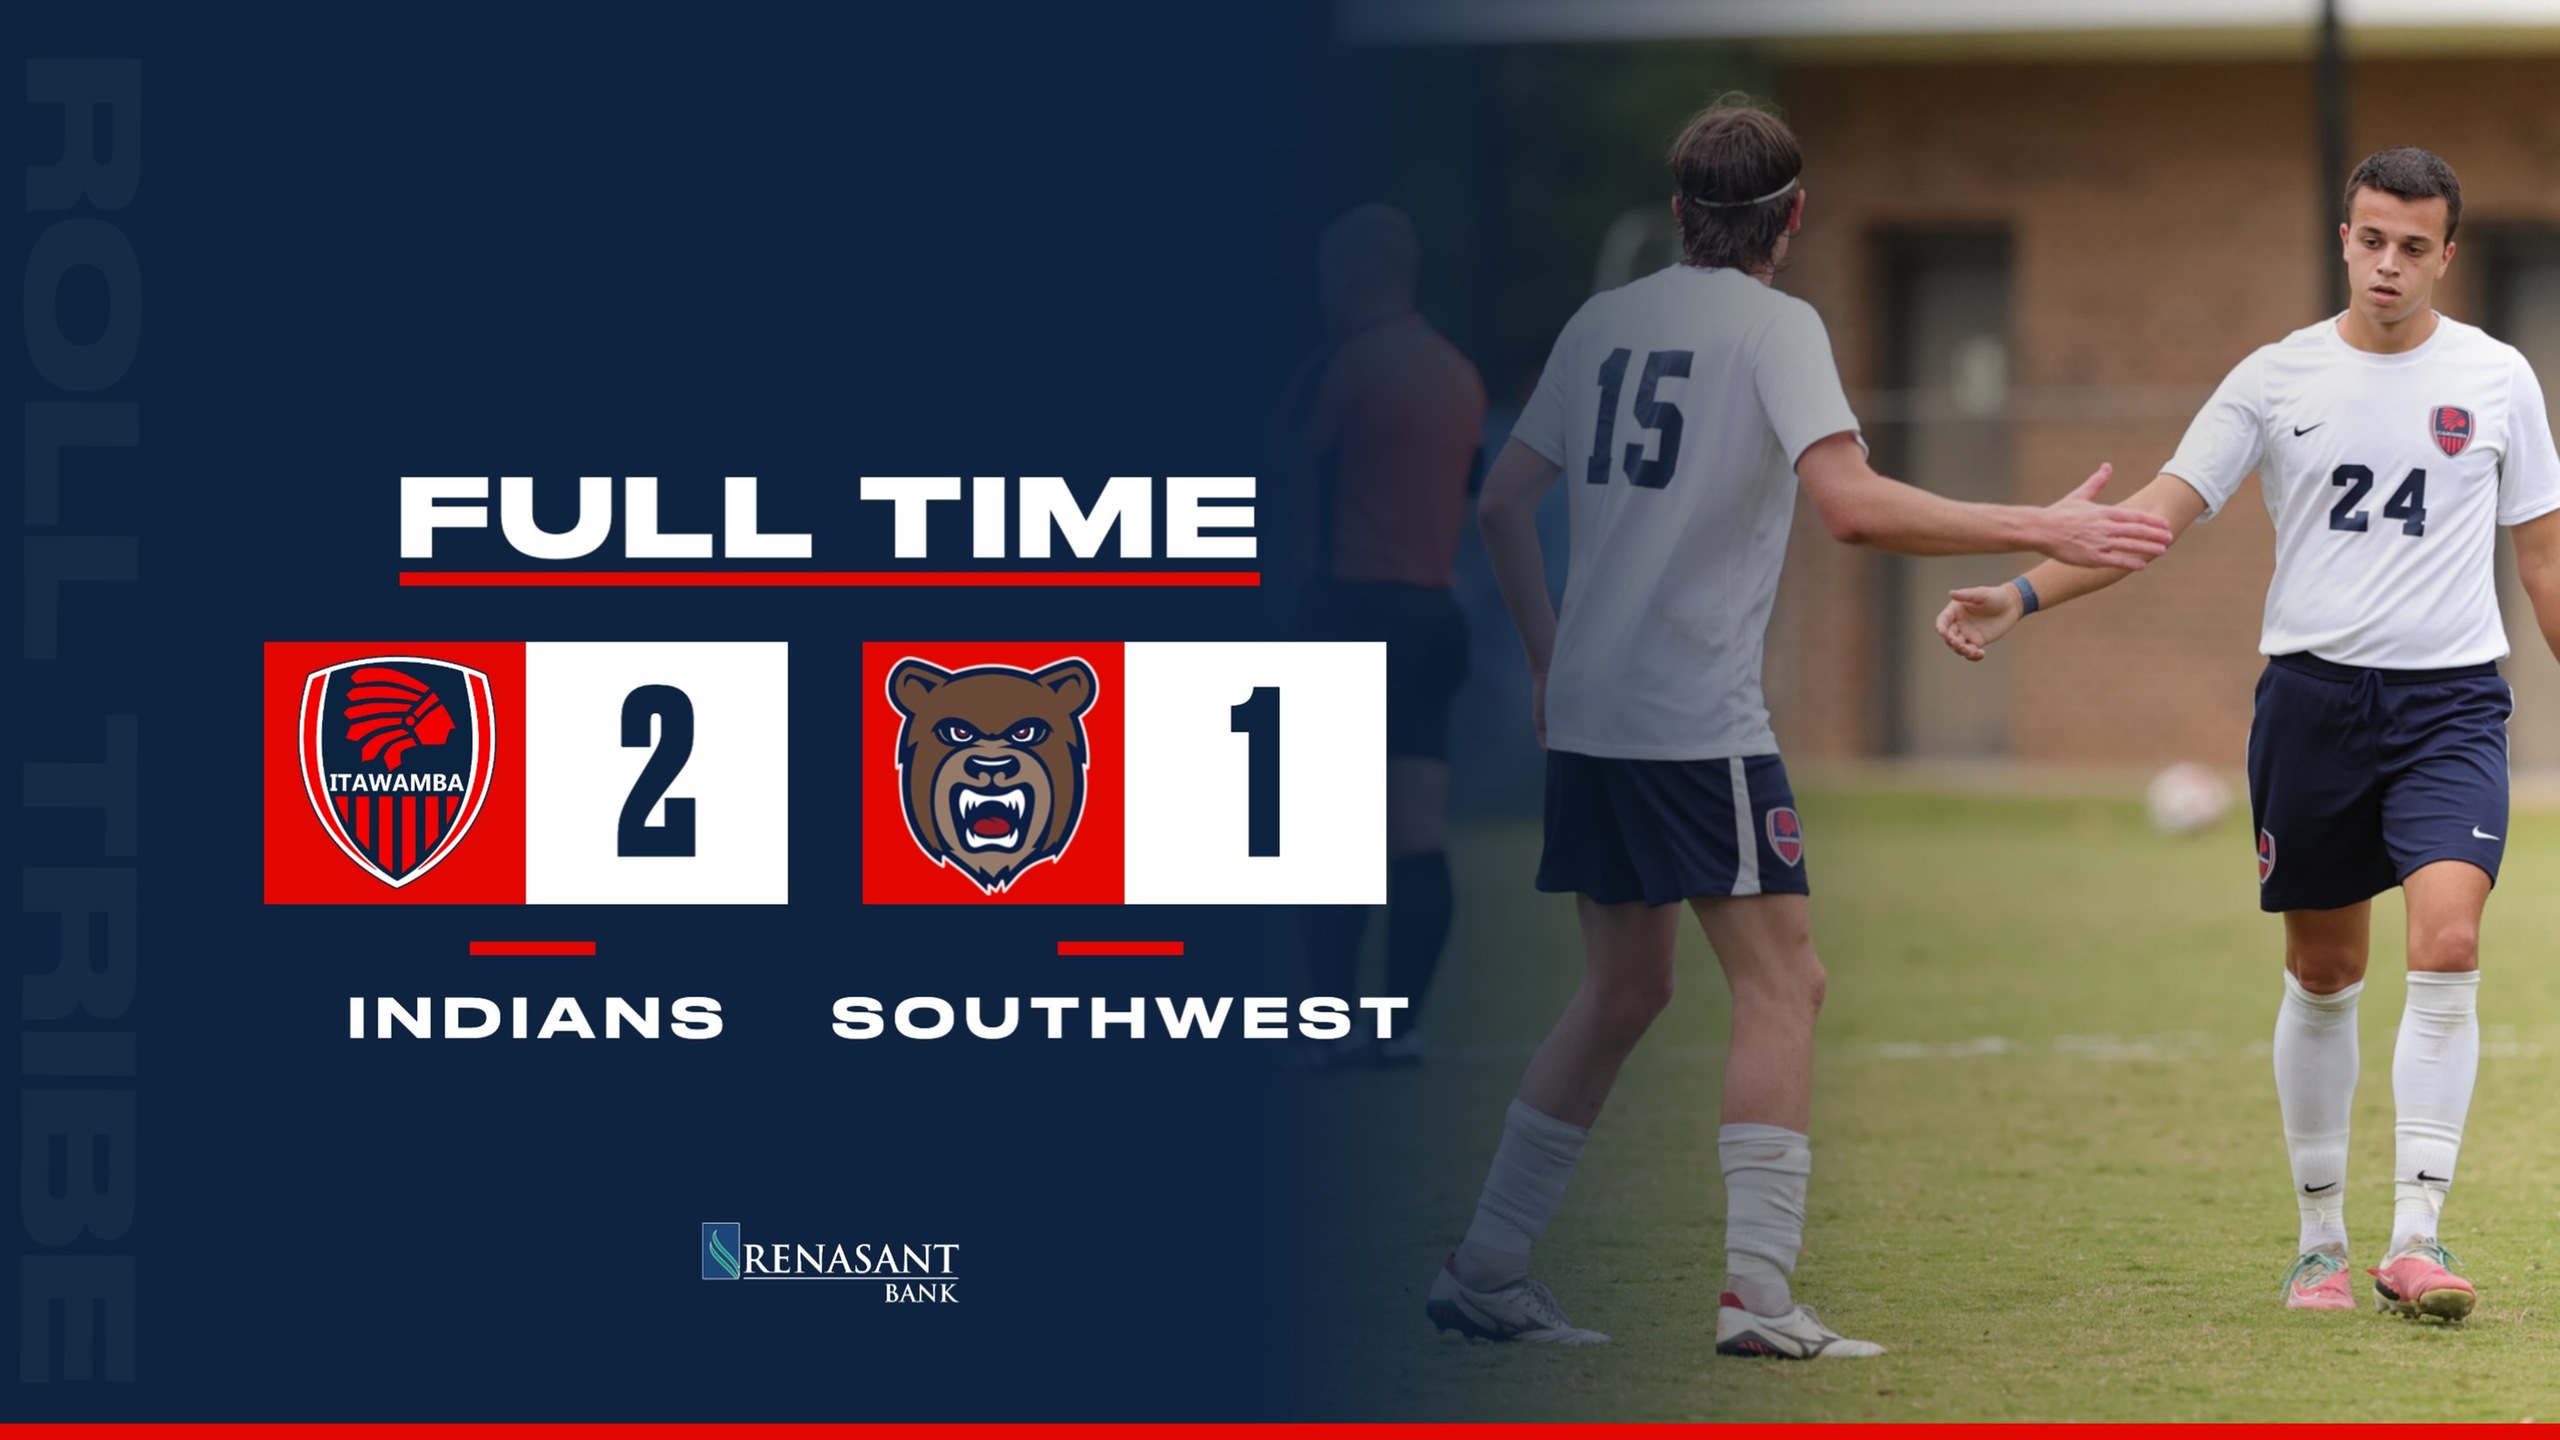 Indians defeat Southwest on the road